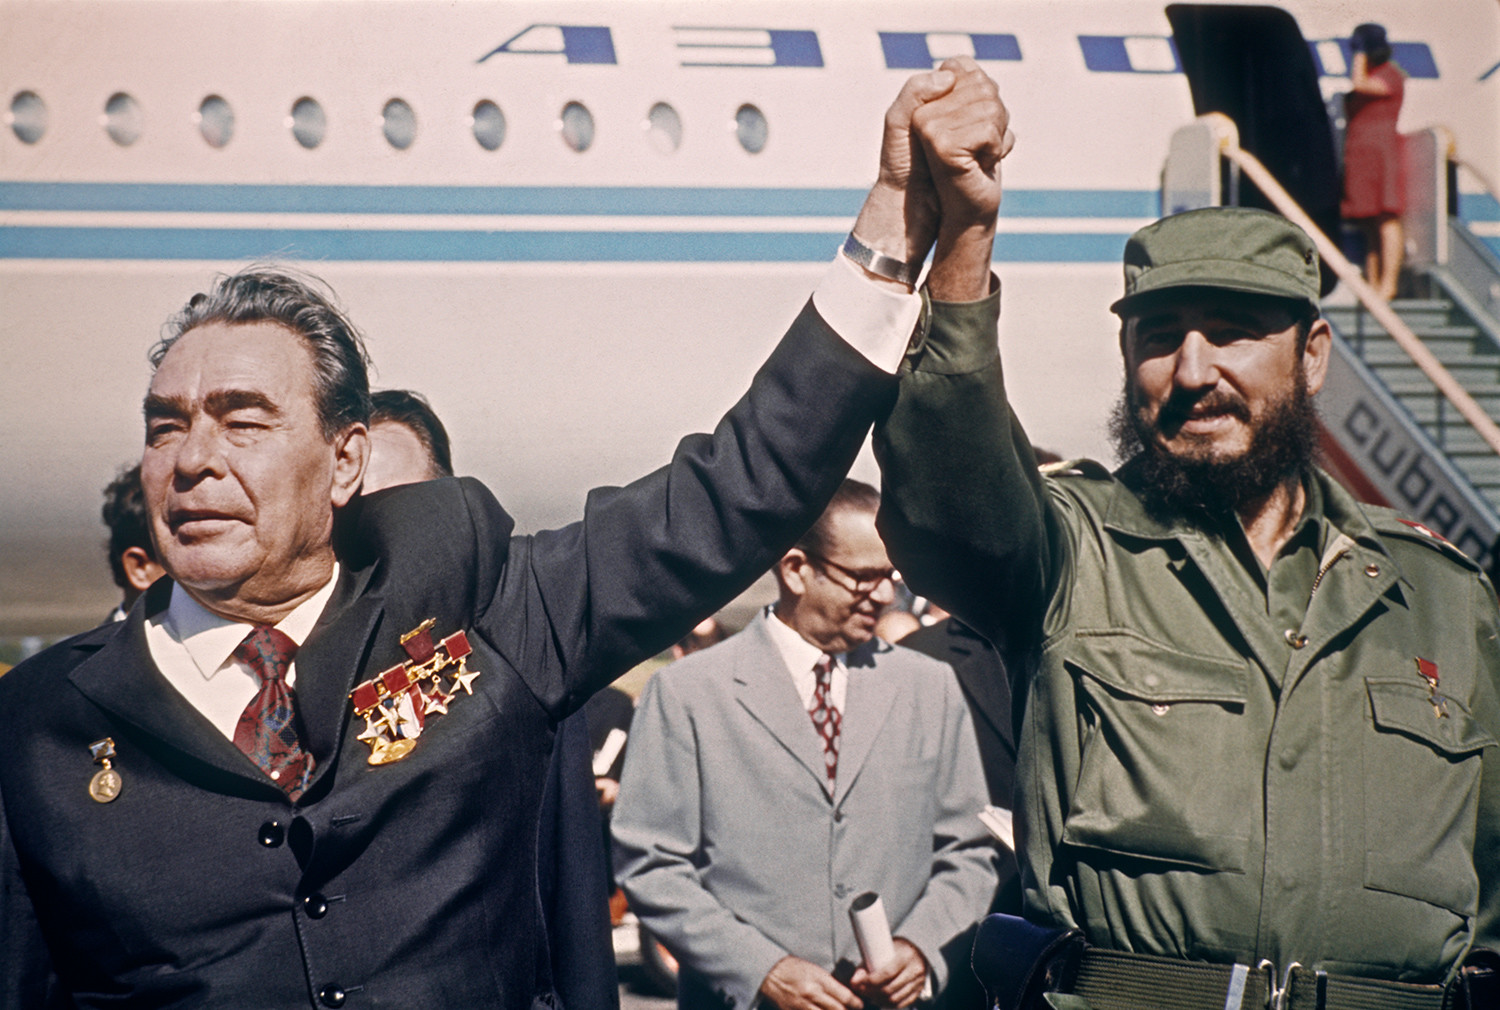 Fidel Castro sees off Leonid Brezhnev after his visit to the Republic of Cuba, 1974.